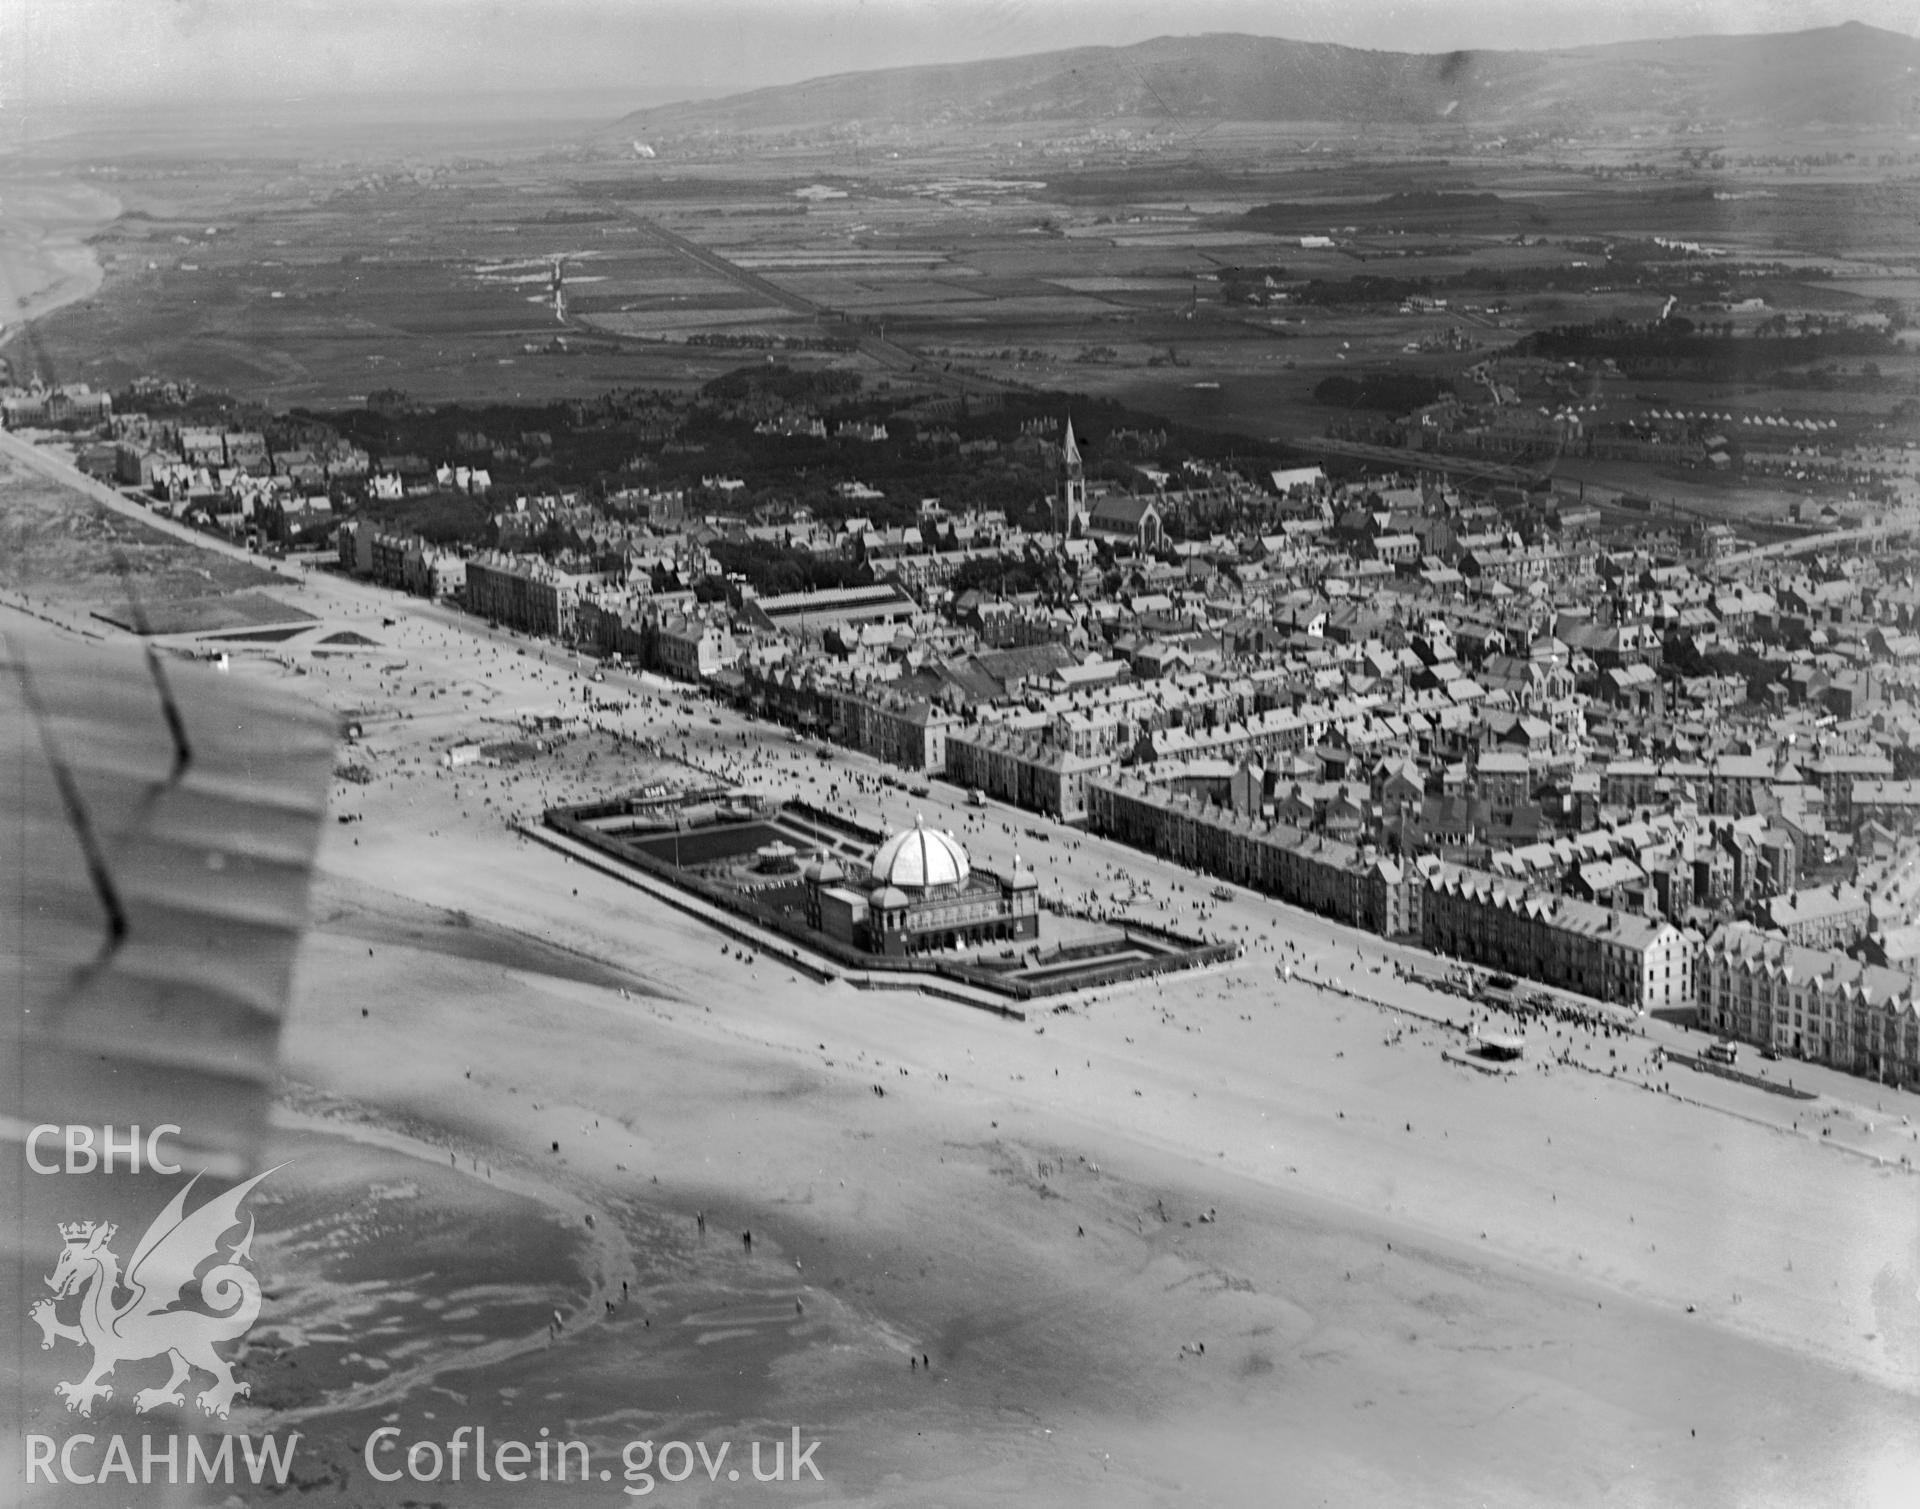 View of Rhyl showing the new pavillion and bandstand complex, oblique aerial view. 5?x4? black and white glass plate negative.